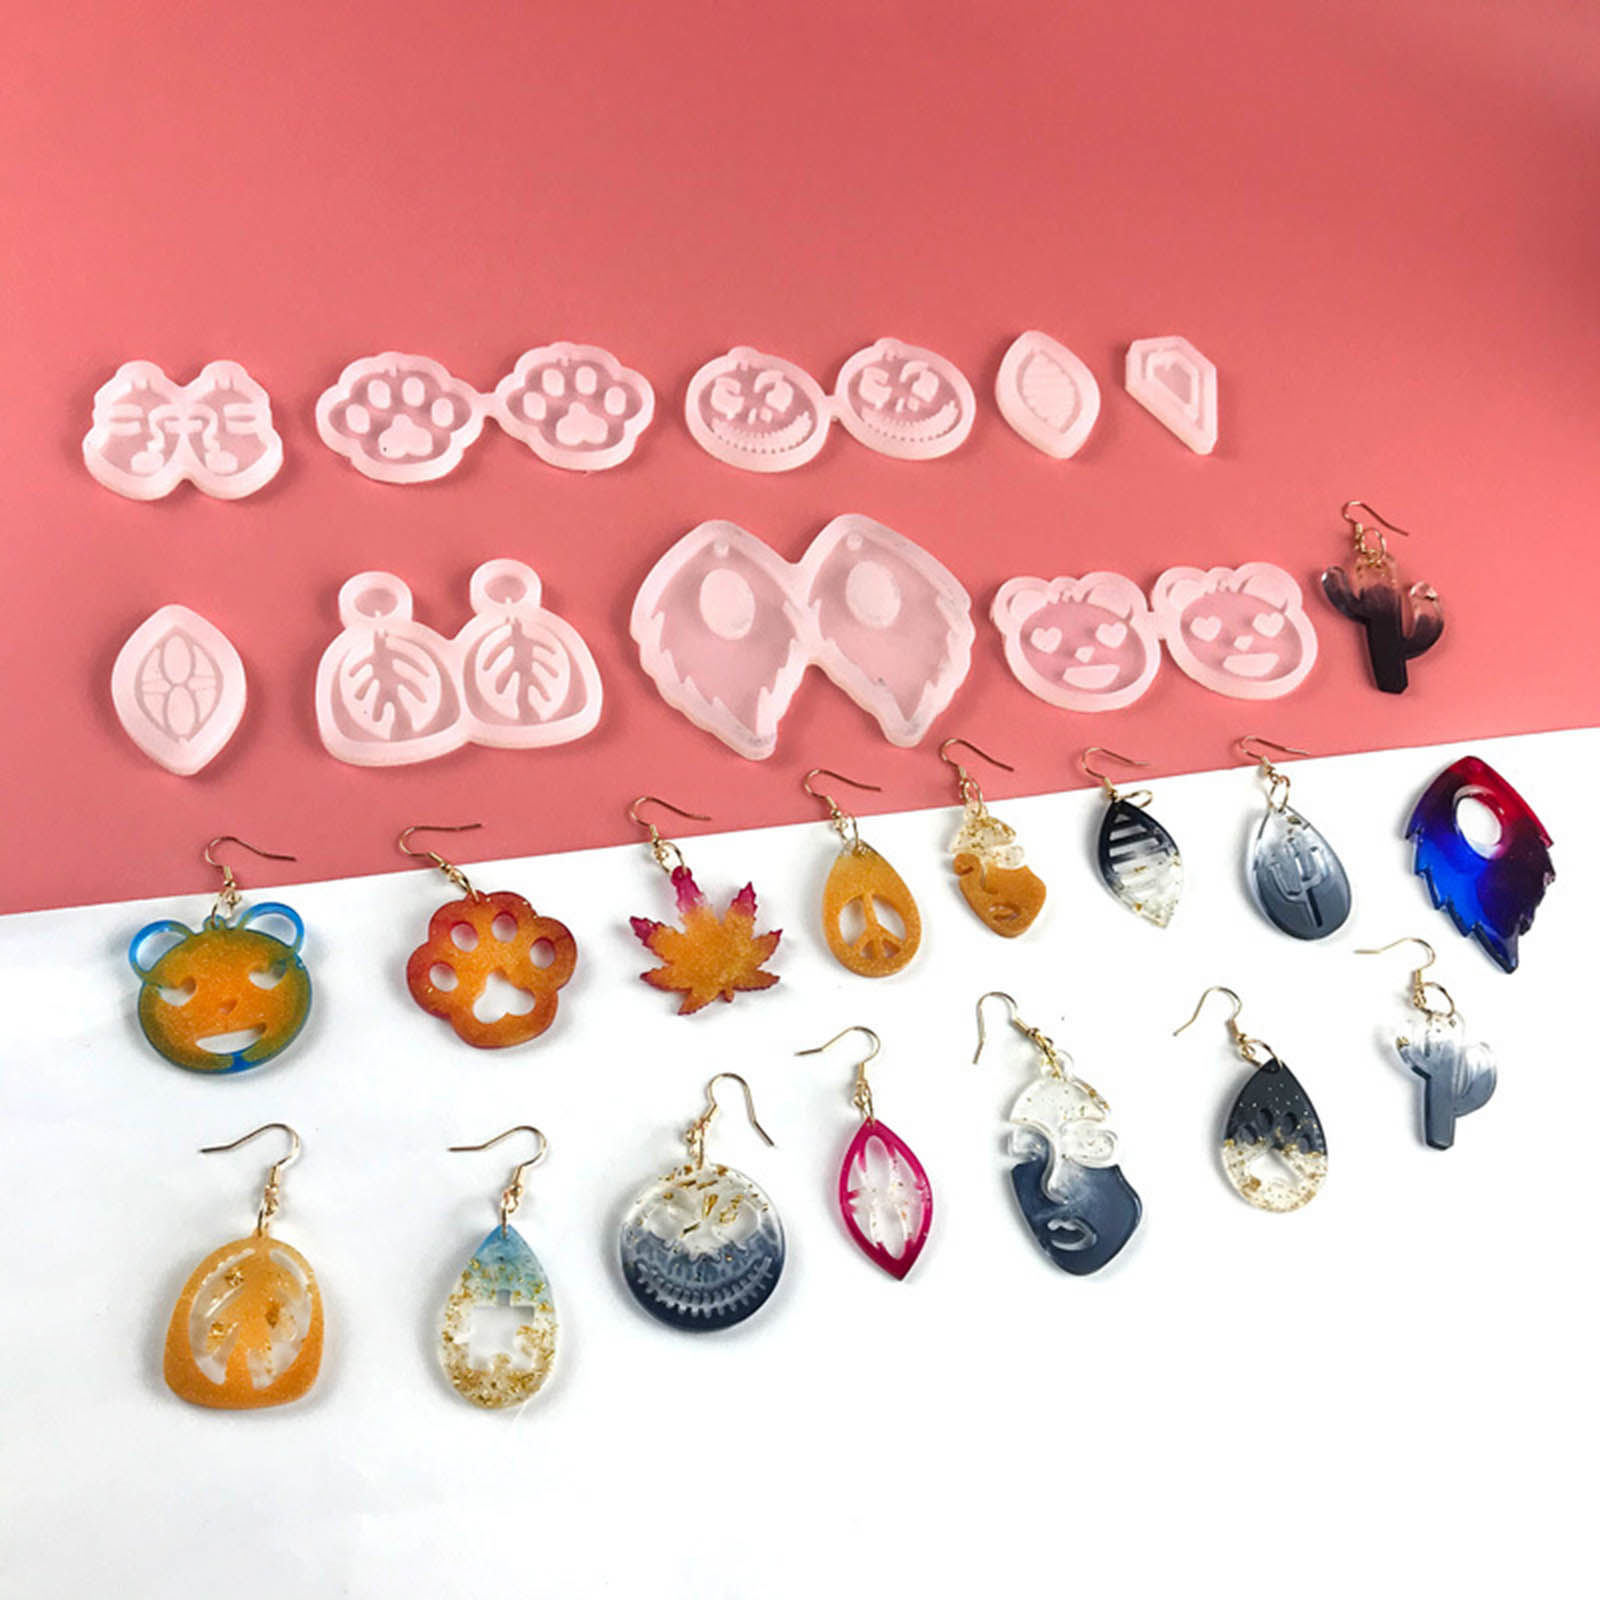 Picture of Silicone Resin Mold For Jewelry Making Earring Pendant Heart White 8.6cm x 3.7cm, 1 Piece